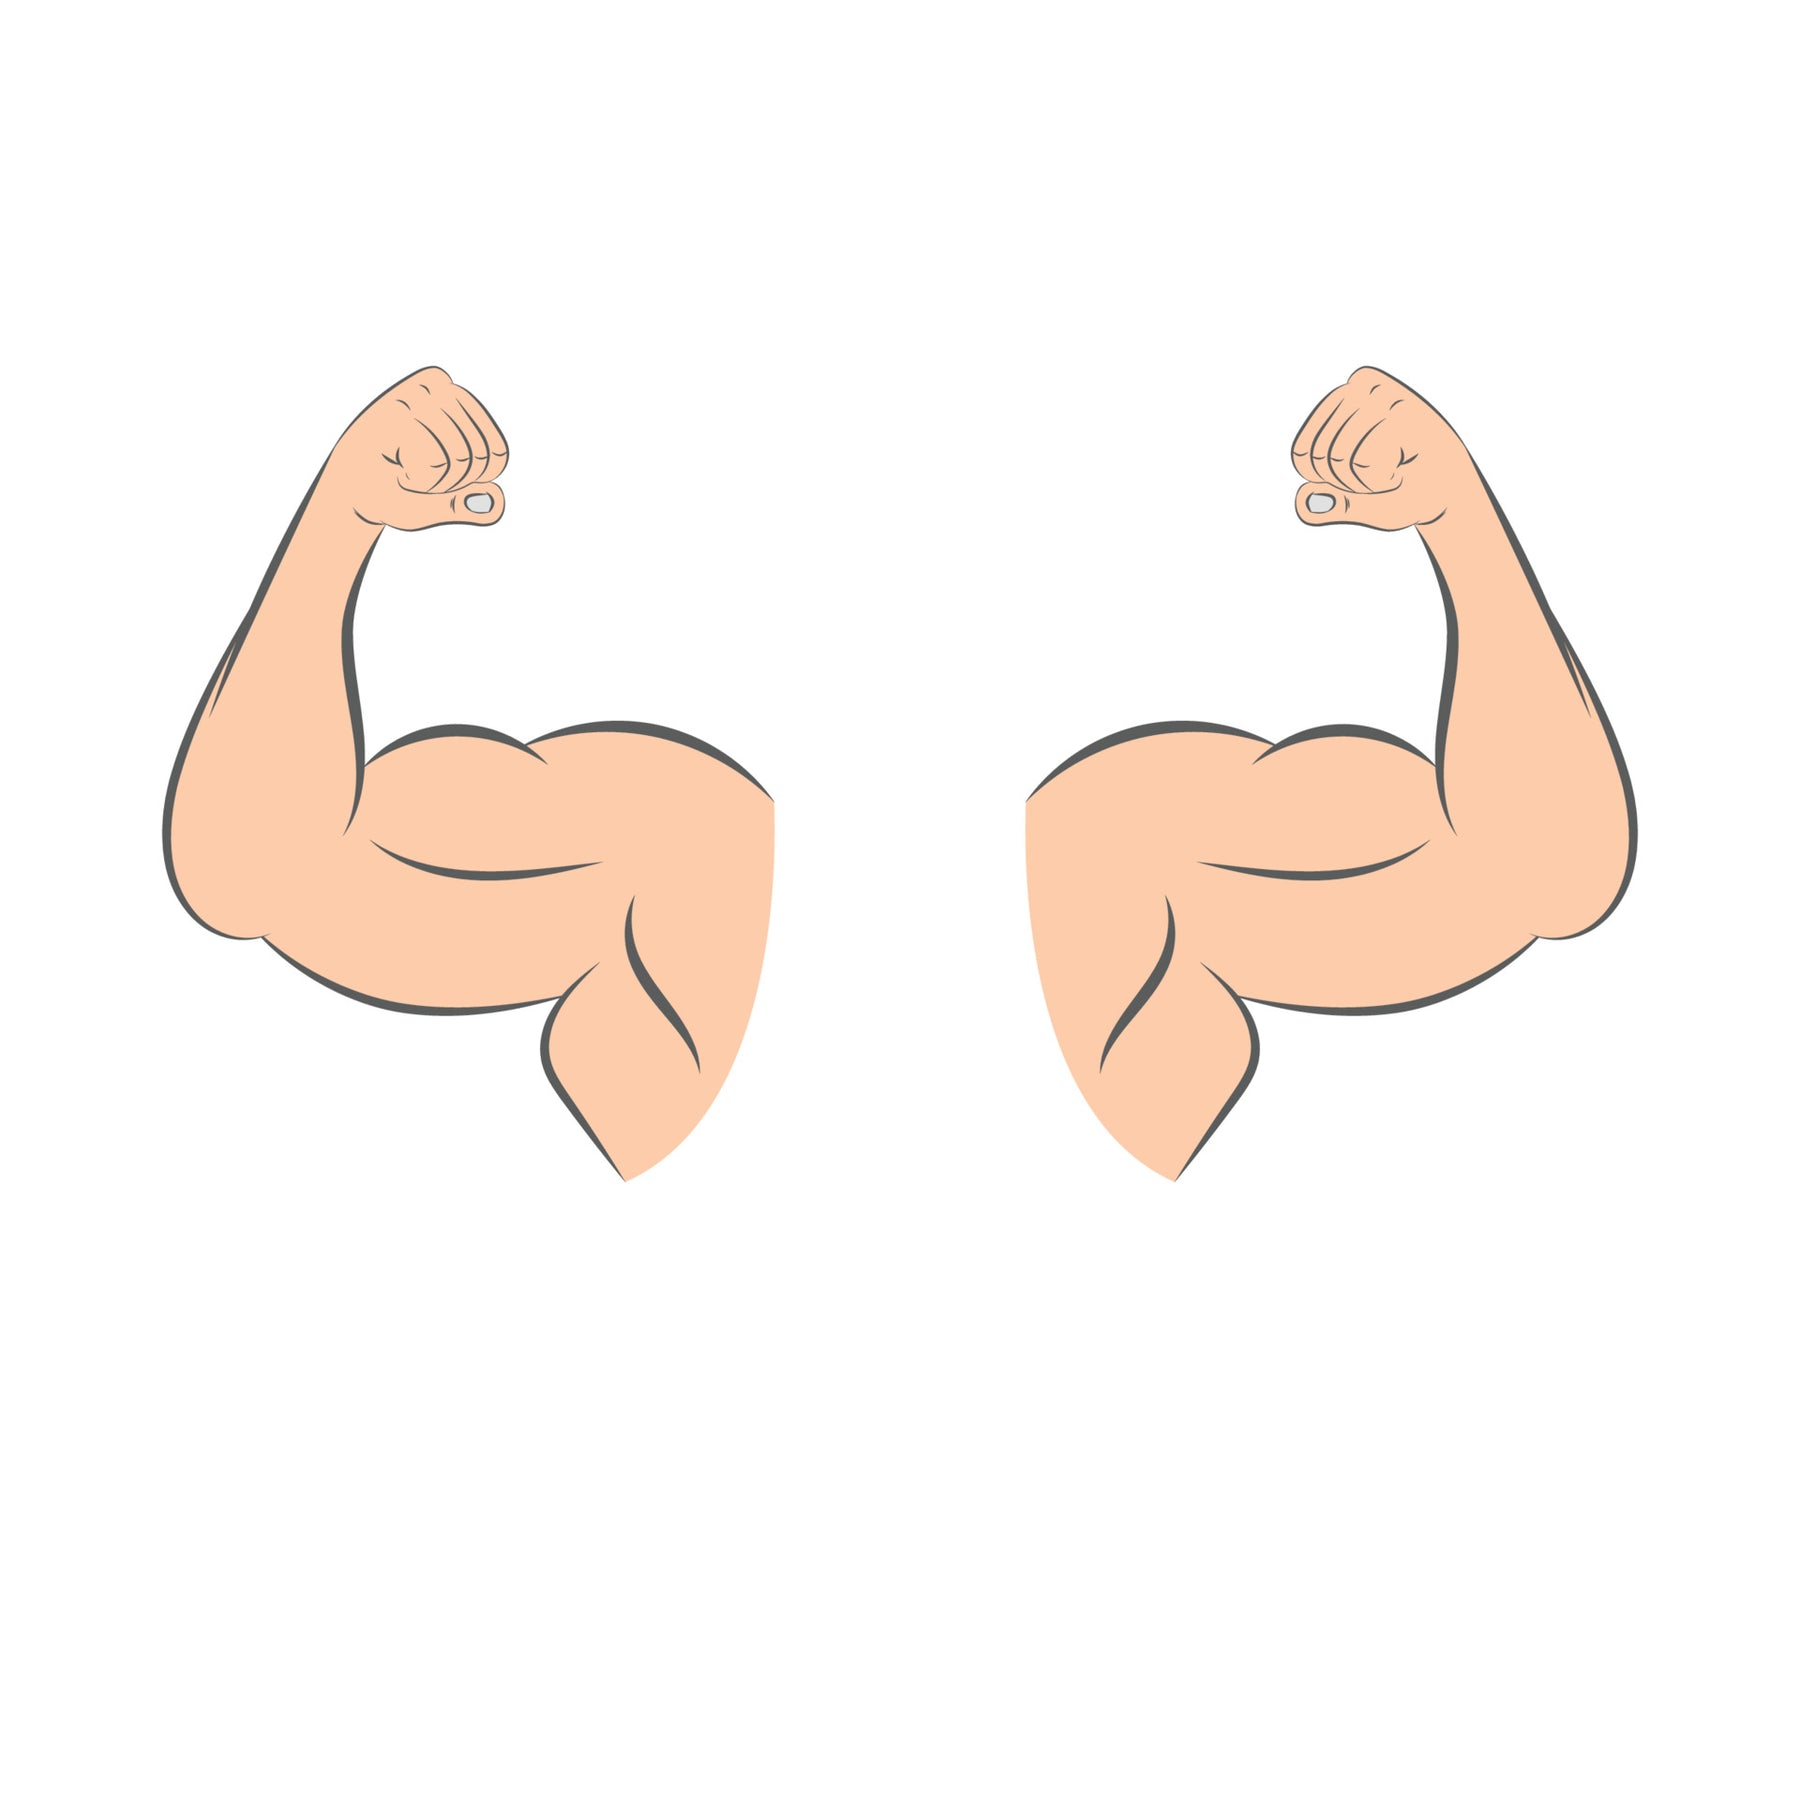 Strong shoulders, animated pair of shoulders that have been achieved through hard work and determination, possibly from dumbbell shoulder workouts.